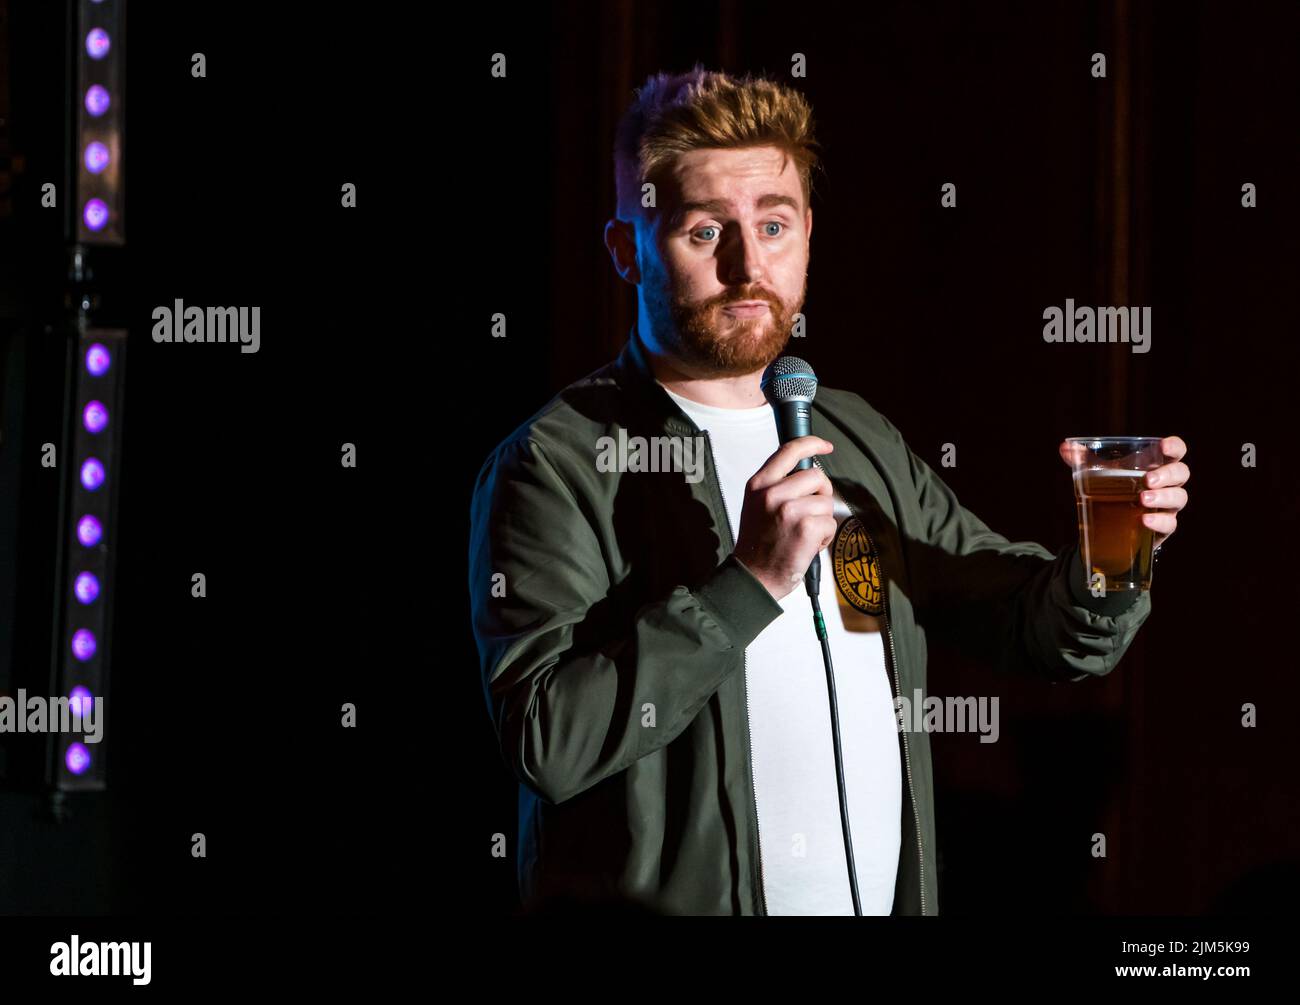 Edinburgh, Scotland, United Kingdom, 4th August 2022. Edinburgh Festival Fringe: The Stand Comedy Club presents a showcase of the comedic talent on offer at this year's Fringe at the New Town Theatre. Pictured: Gareth Waugh.  Credit: Sally Anderson/Alamy Live News Stock Photo